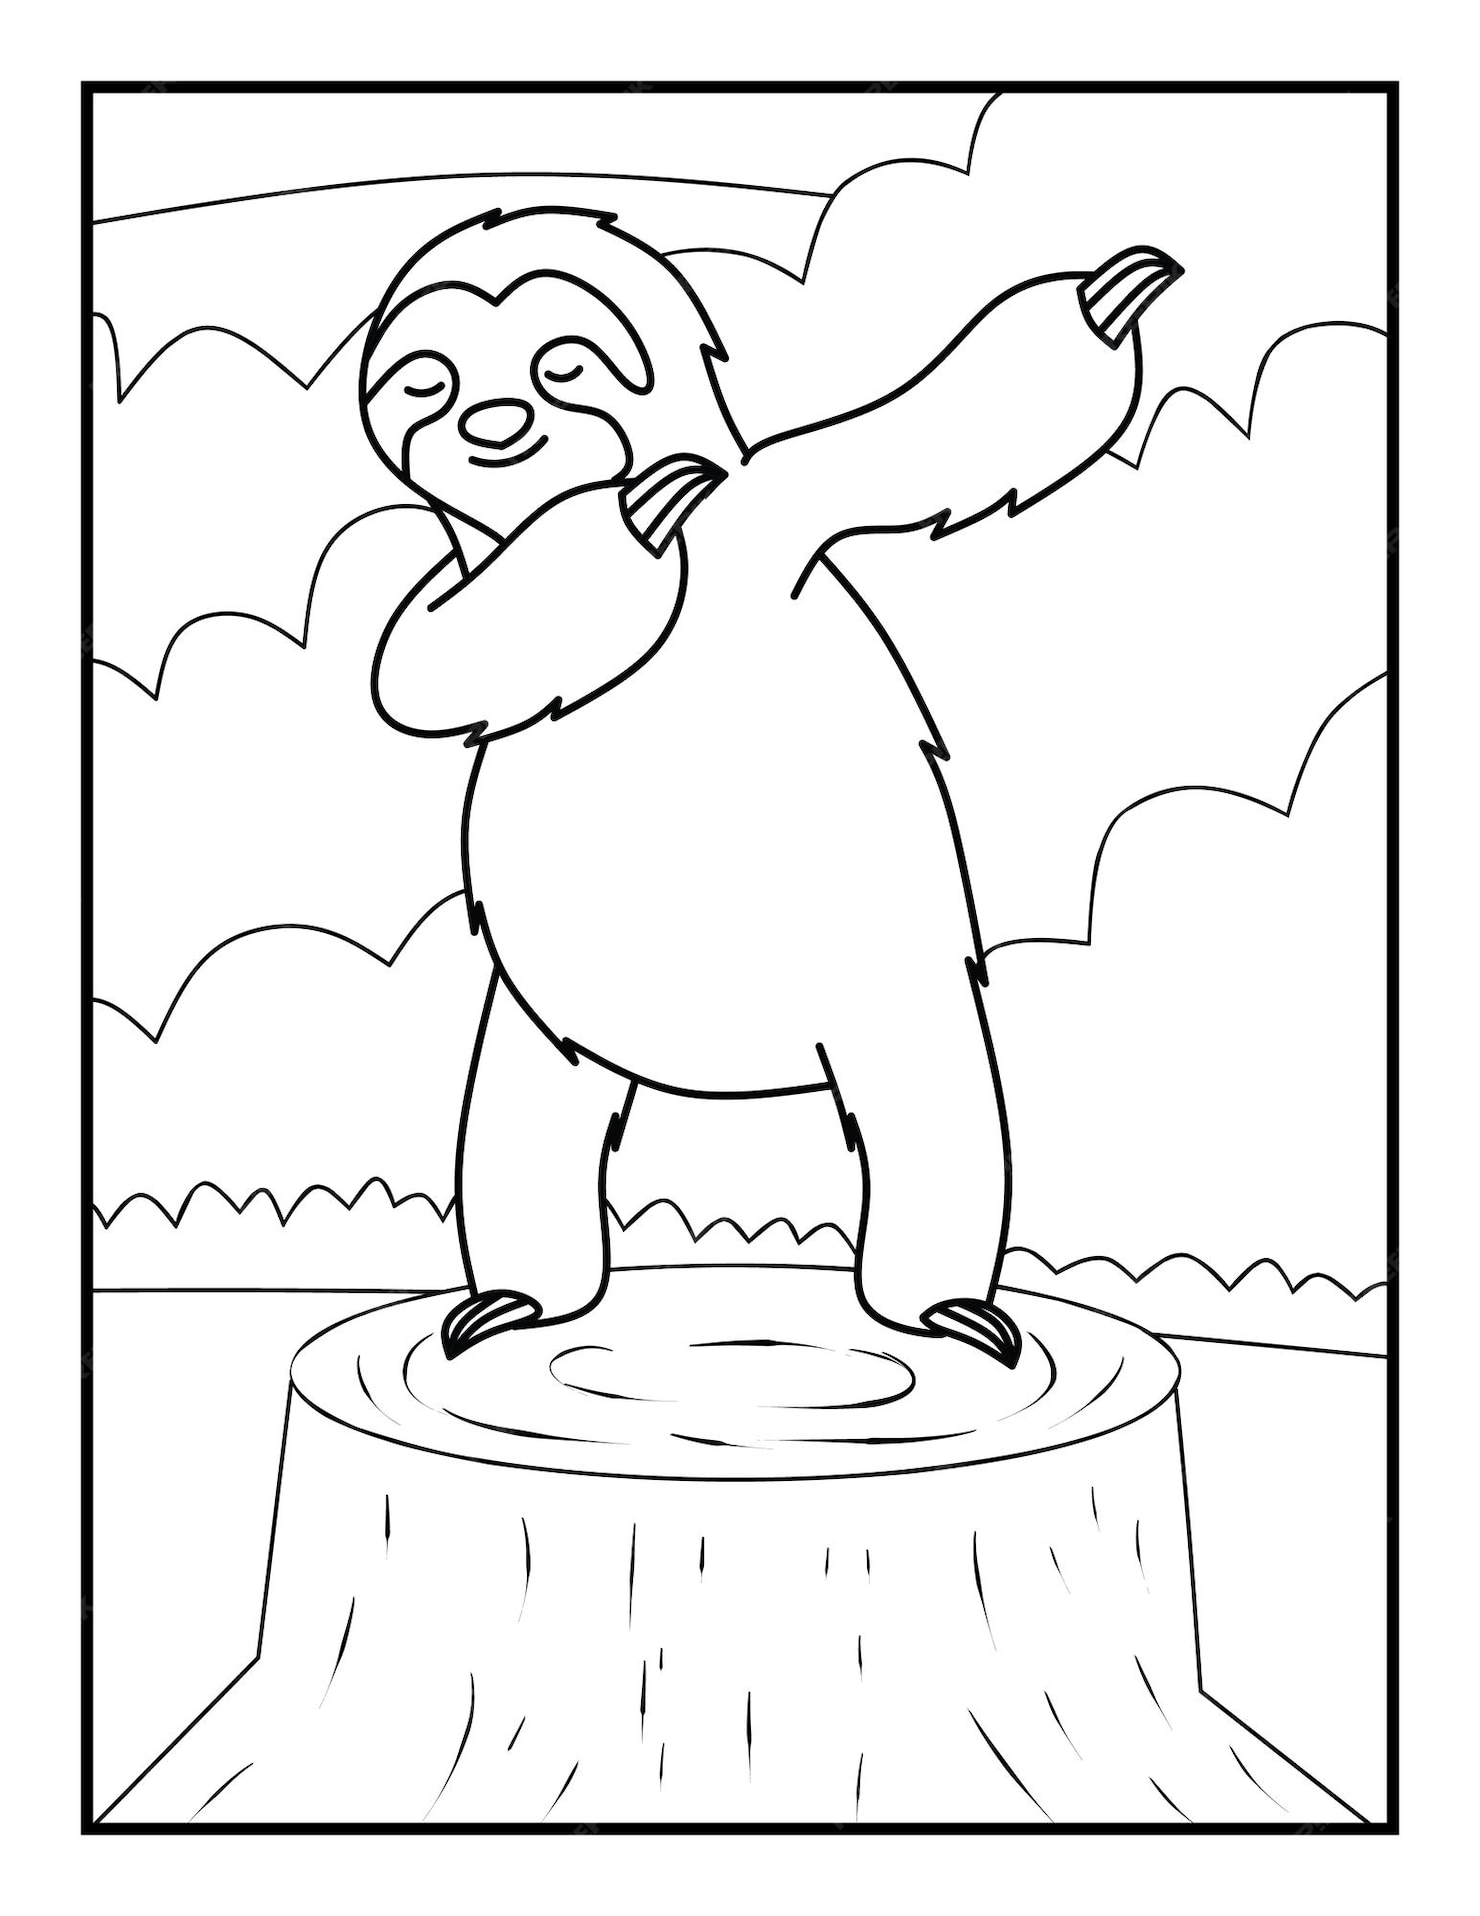 Premium Vector | Cute sloth coloring book pages for kids coloring sheet